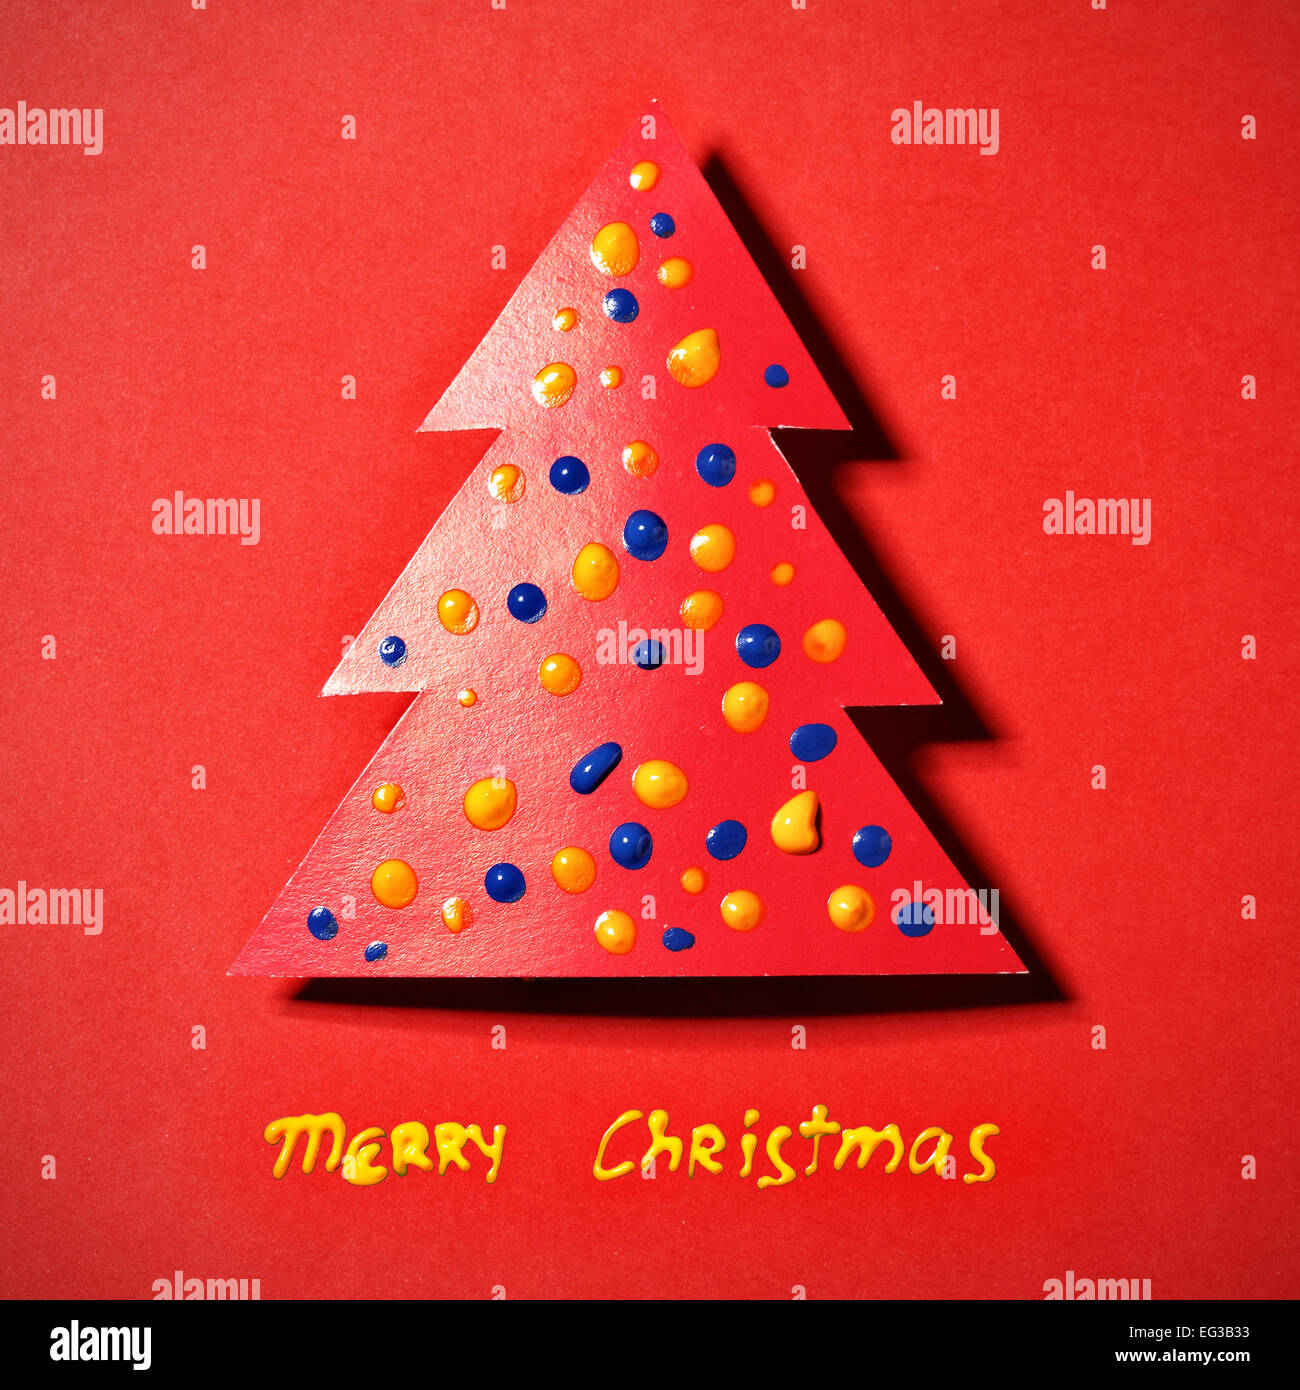 Paper Christmas tree on red background and wishes Stock Photo